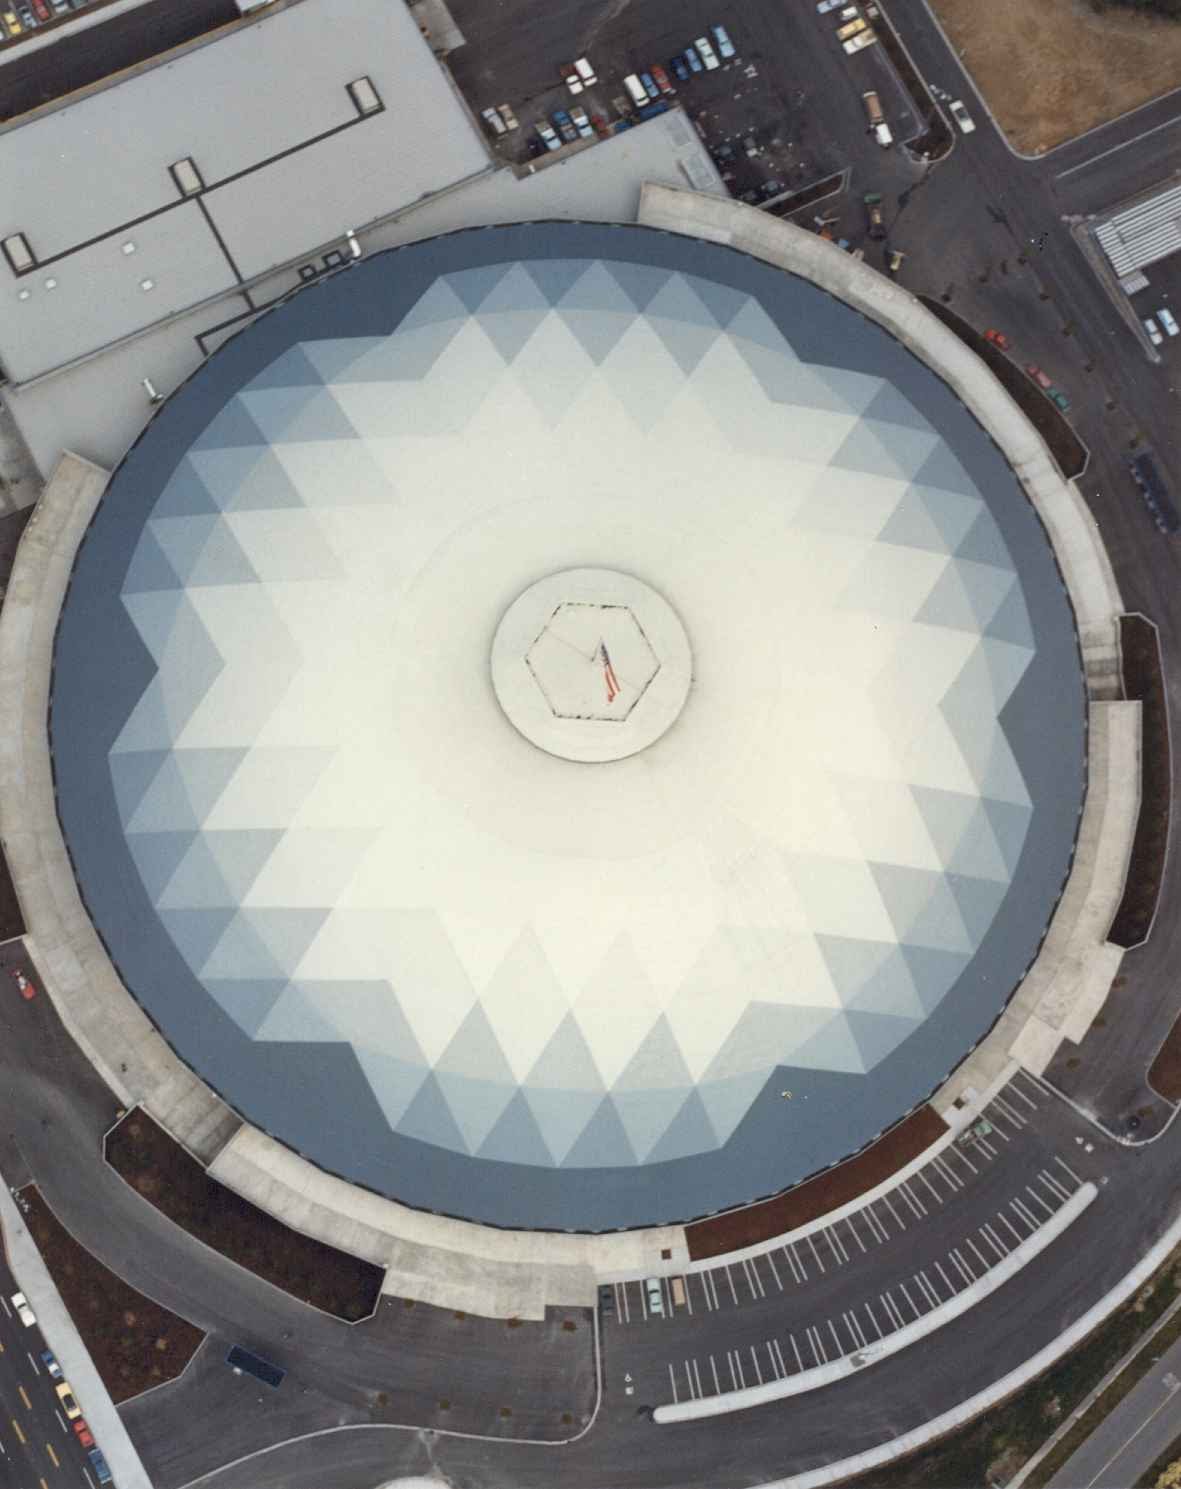 Working Wonders With Wood: The Tacoma Dome